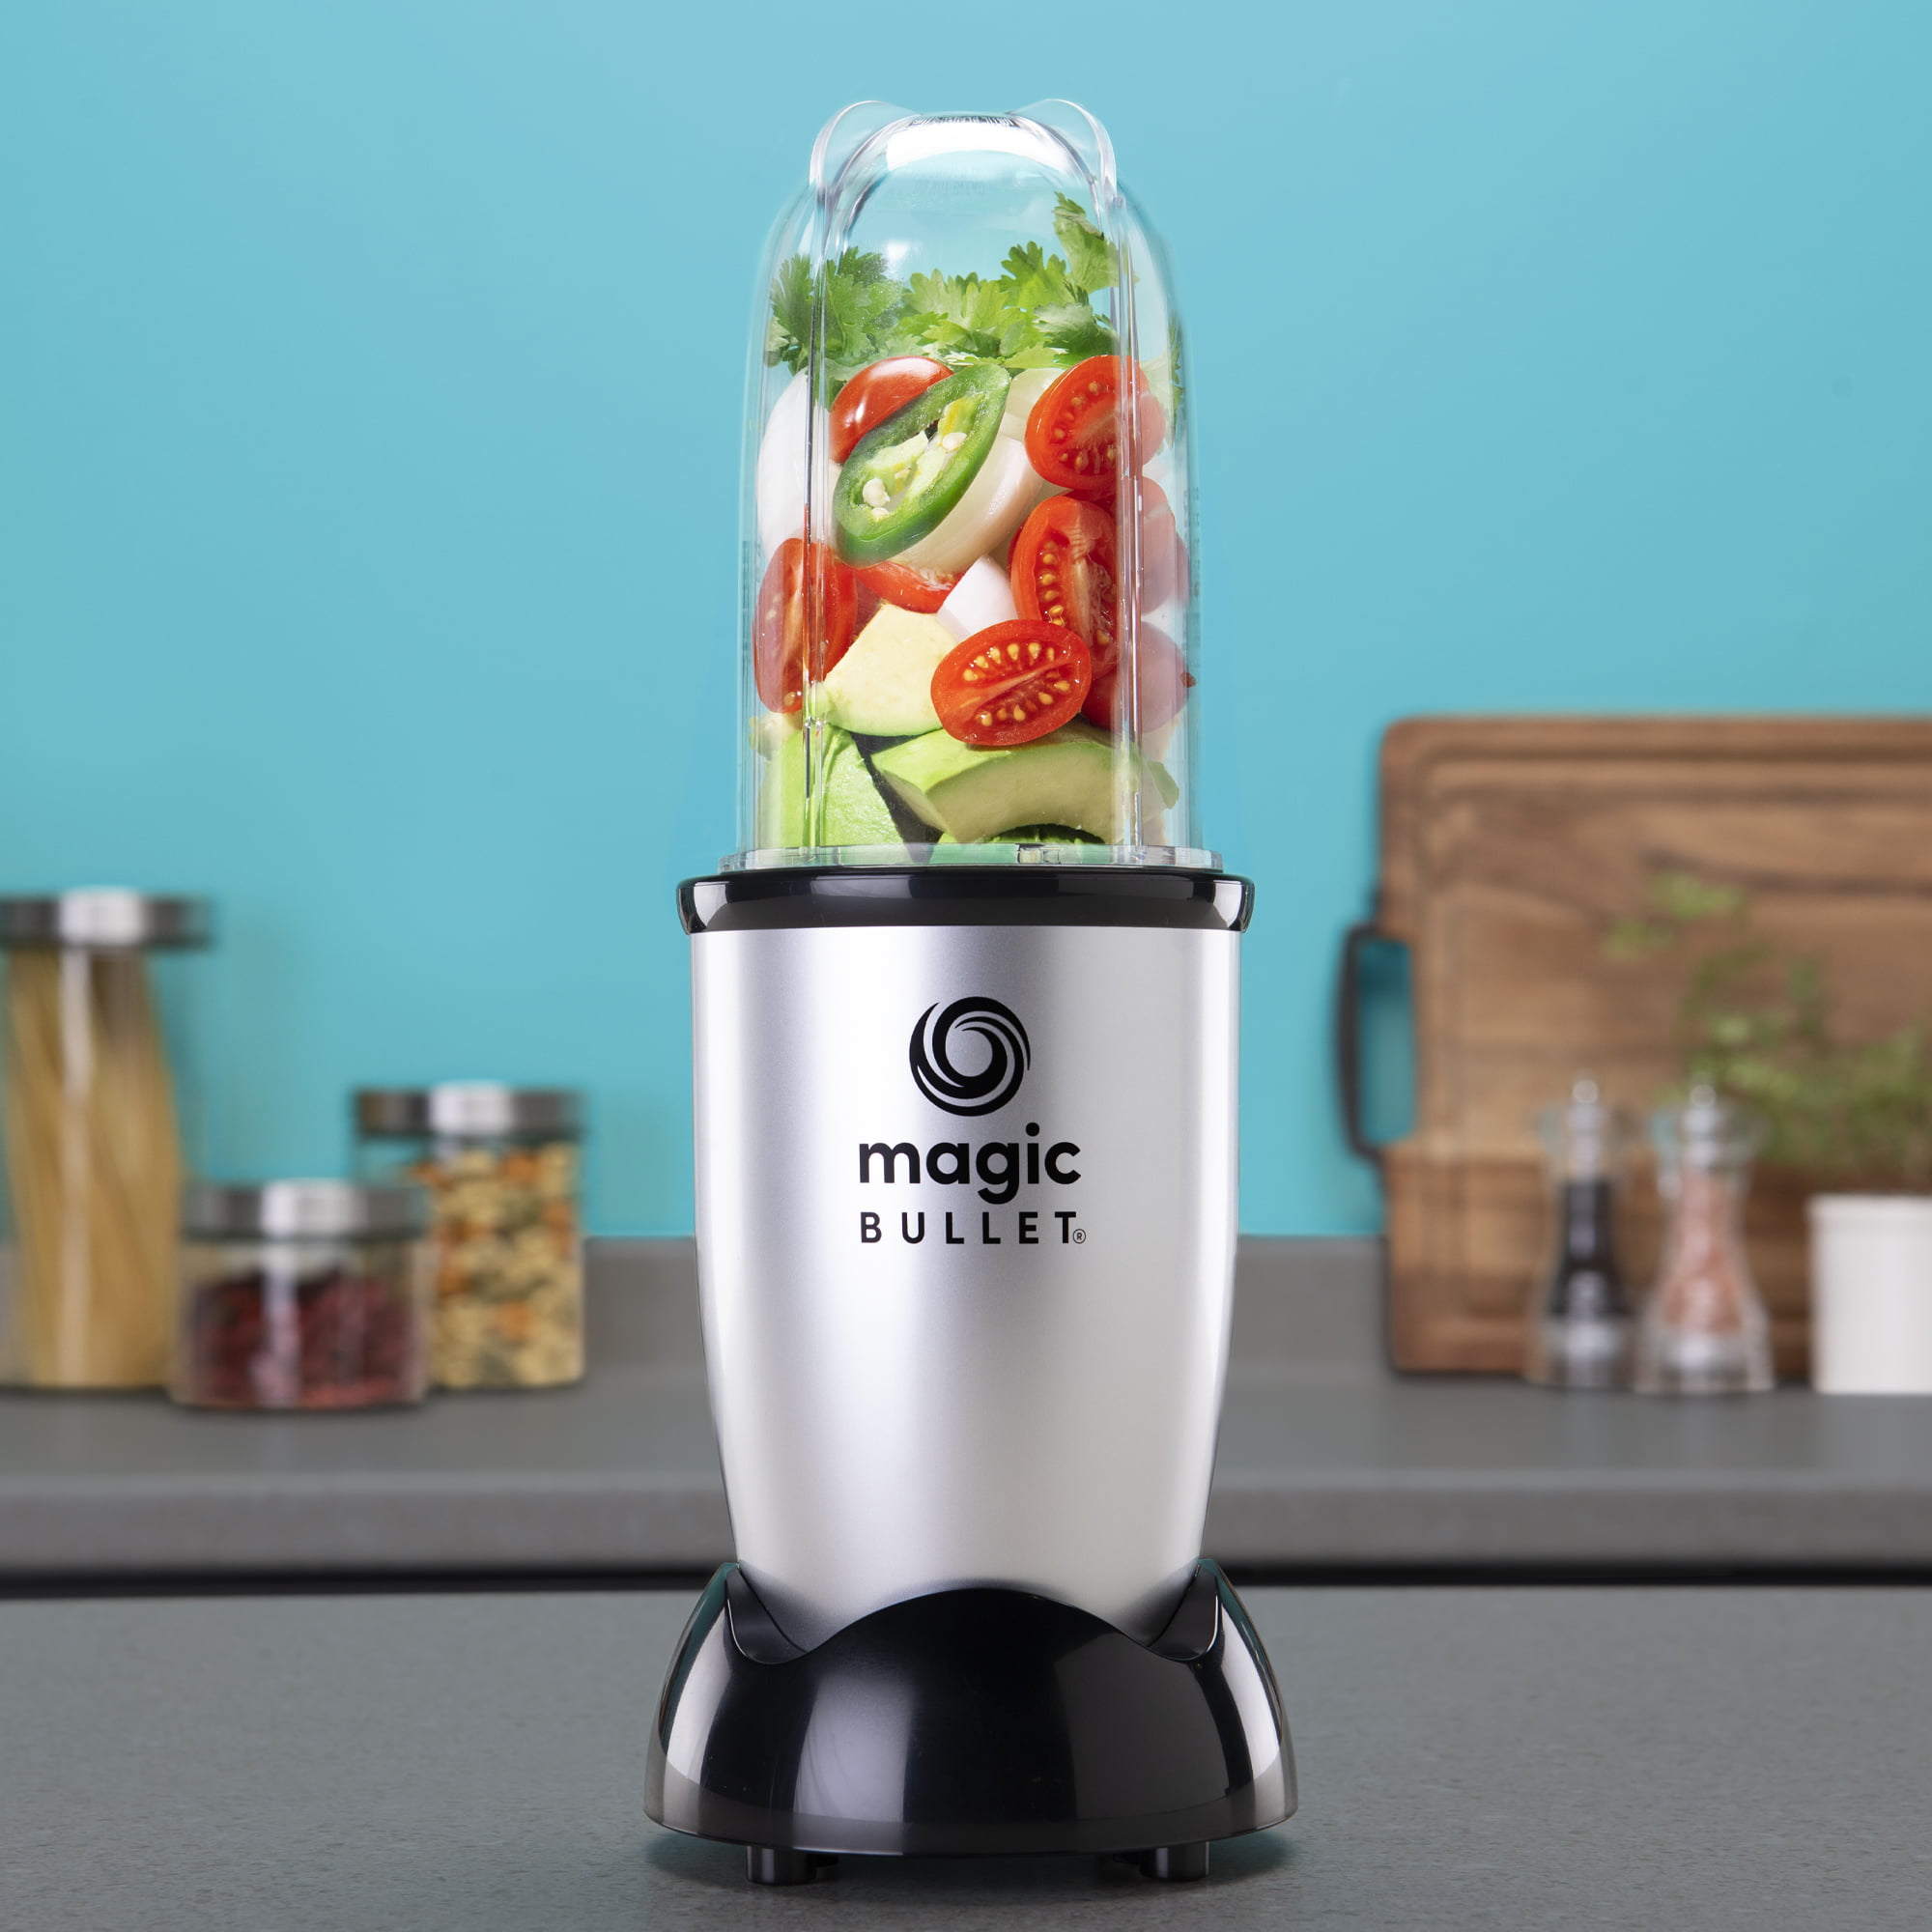 Ninja and Magic Bullet blenders on sale for $50 off at Walmart